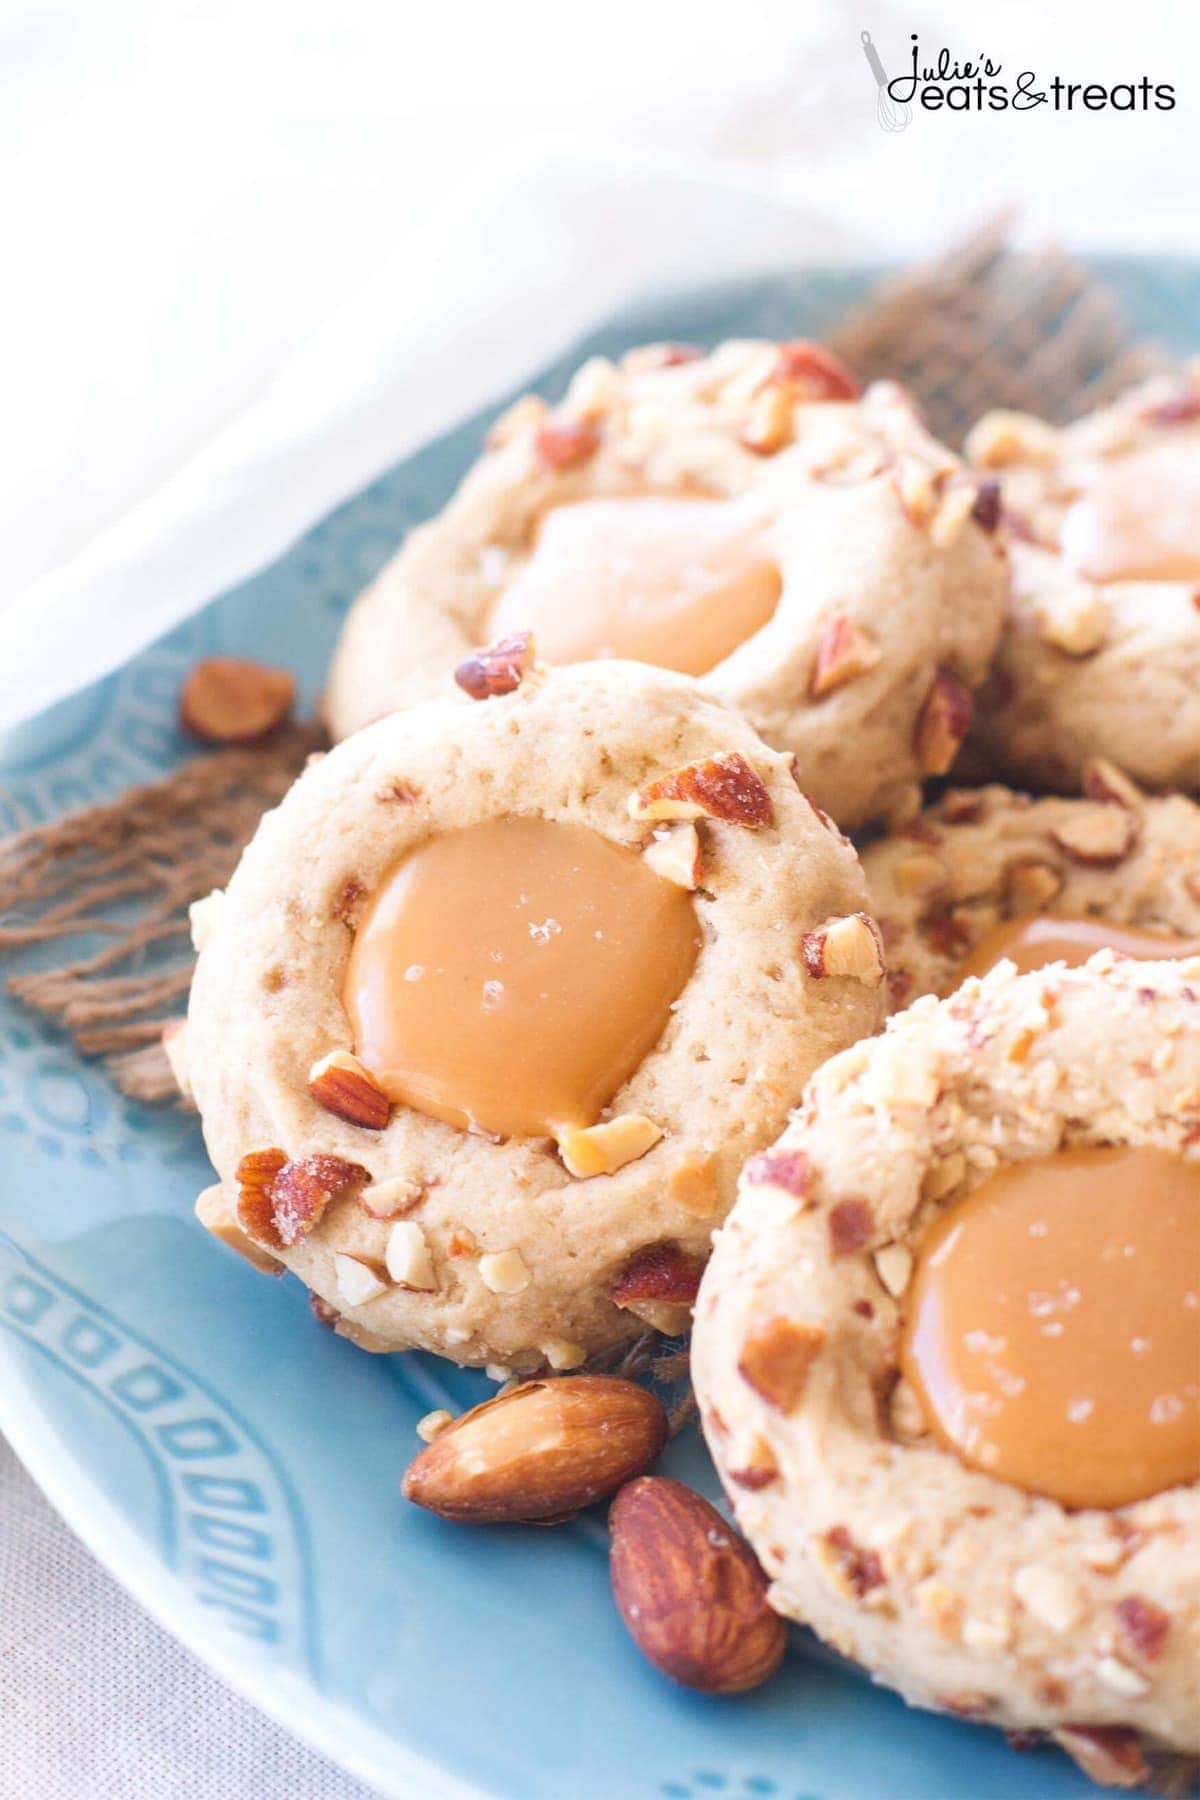 Salted Caramel Almond Thumbprint Cookies ~ Easy, Cookies Are Perfect for Any Holiday Party or Cookie Exchange! Slightly Nutty, Sweet and Incredibly Rich with Salted Caramel Filling!